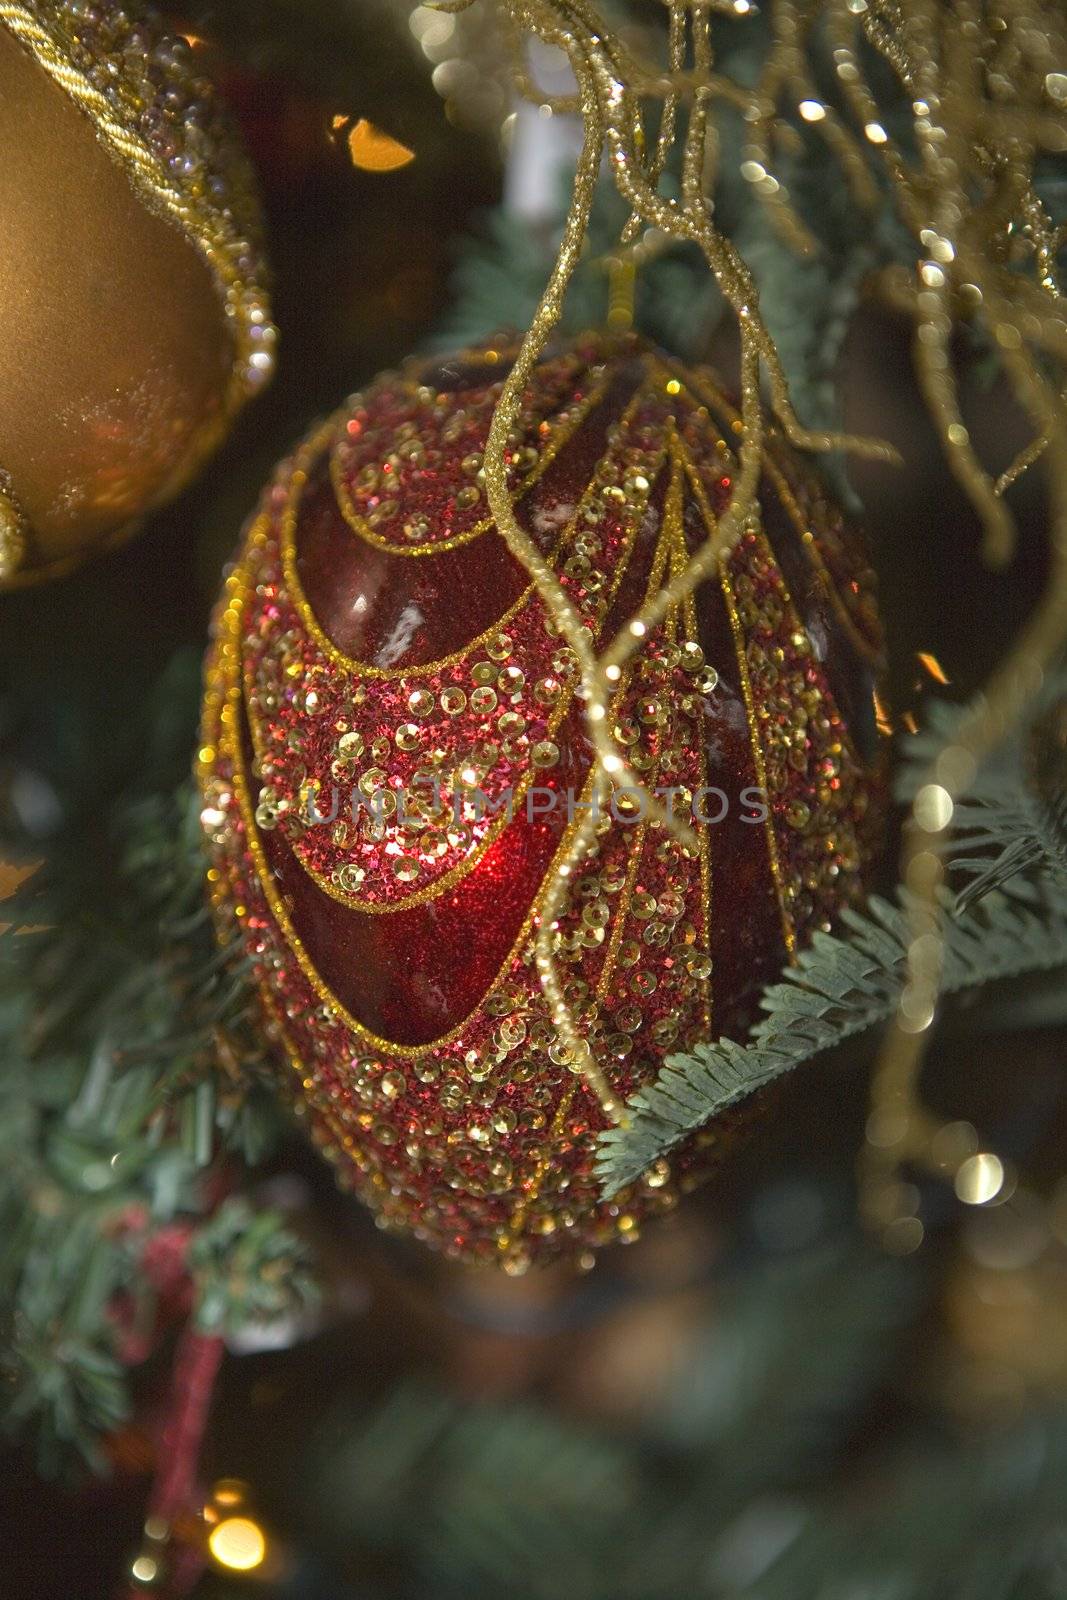 Red Christmas Ornament on a Tree by KevinPanizza